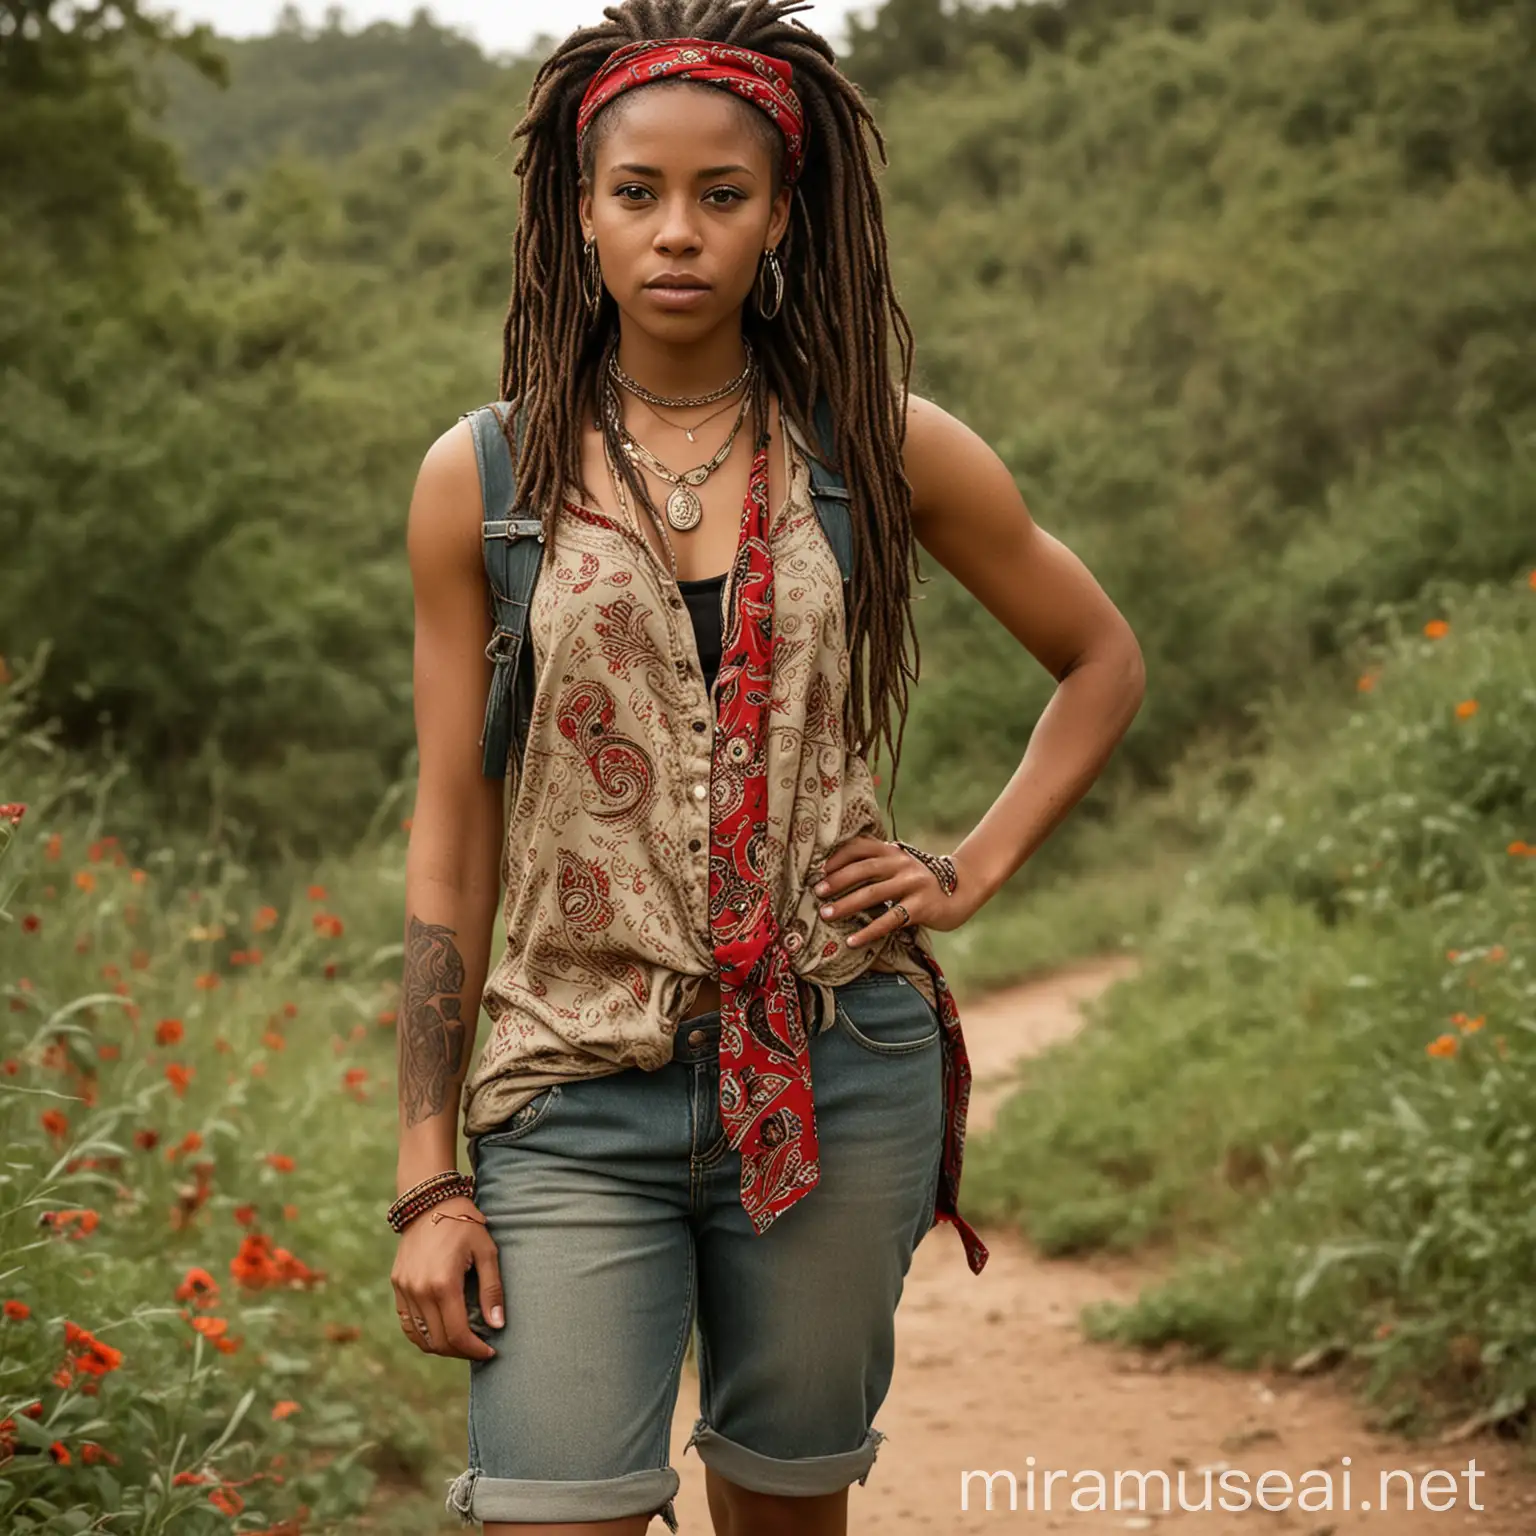 Strong African Woman with Dreadlocks and Tattoos in Khaki Shirt and Denim Shorts